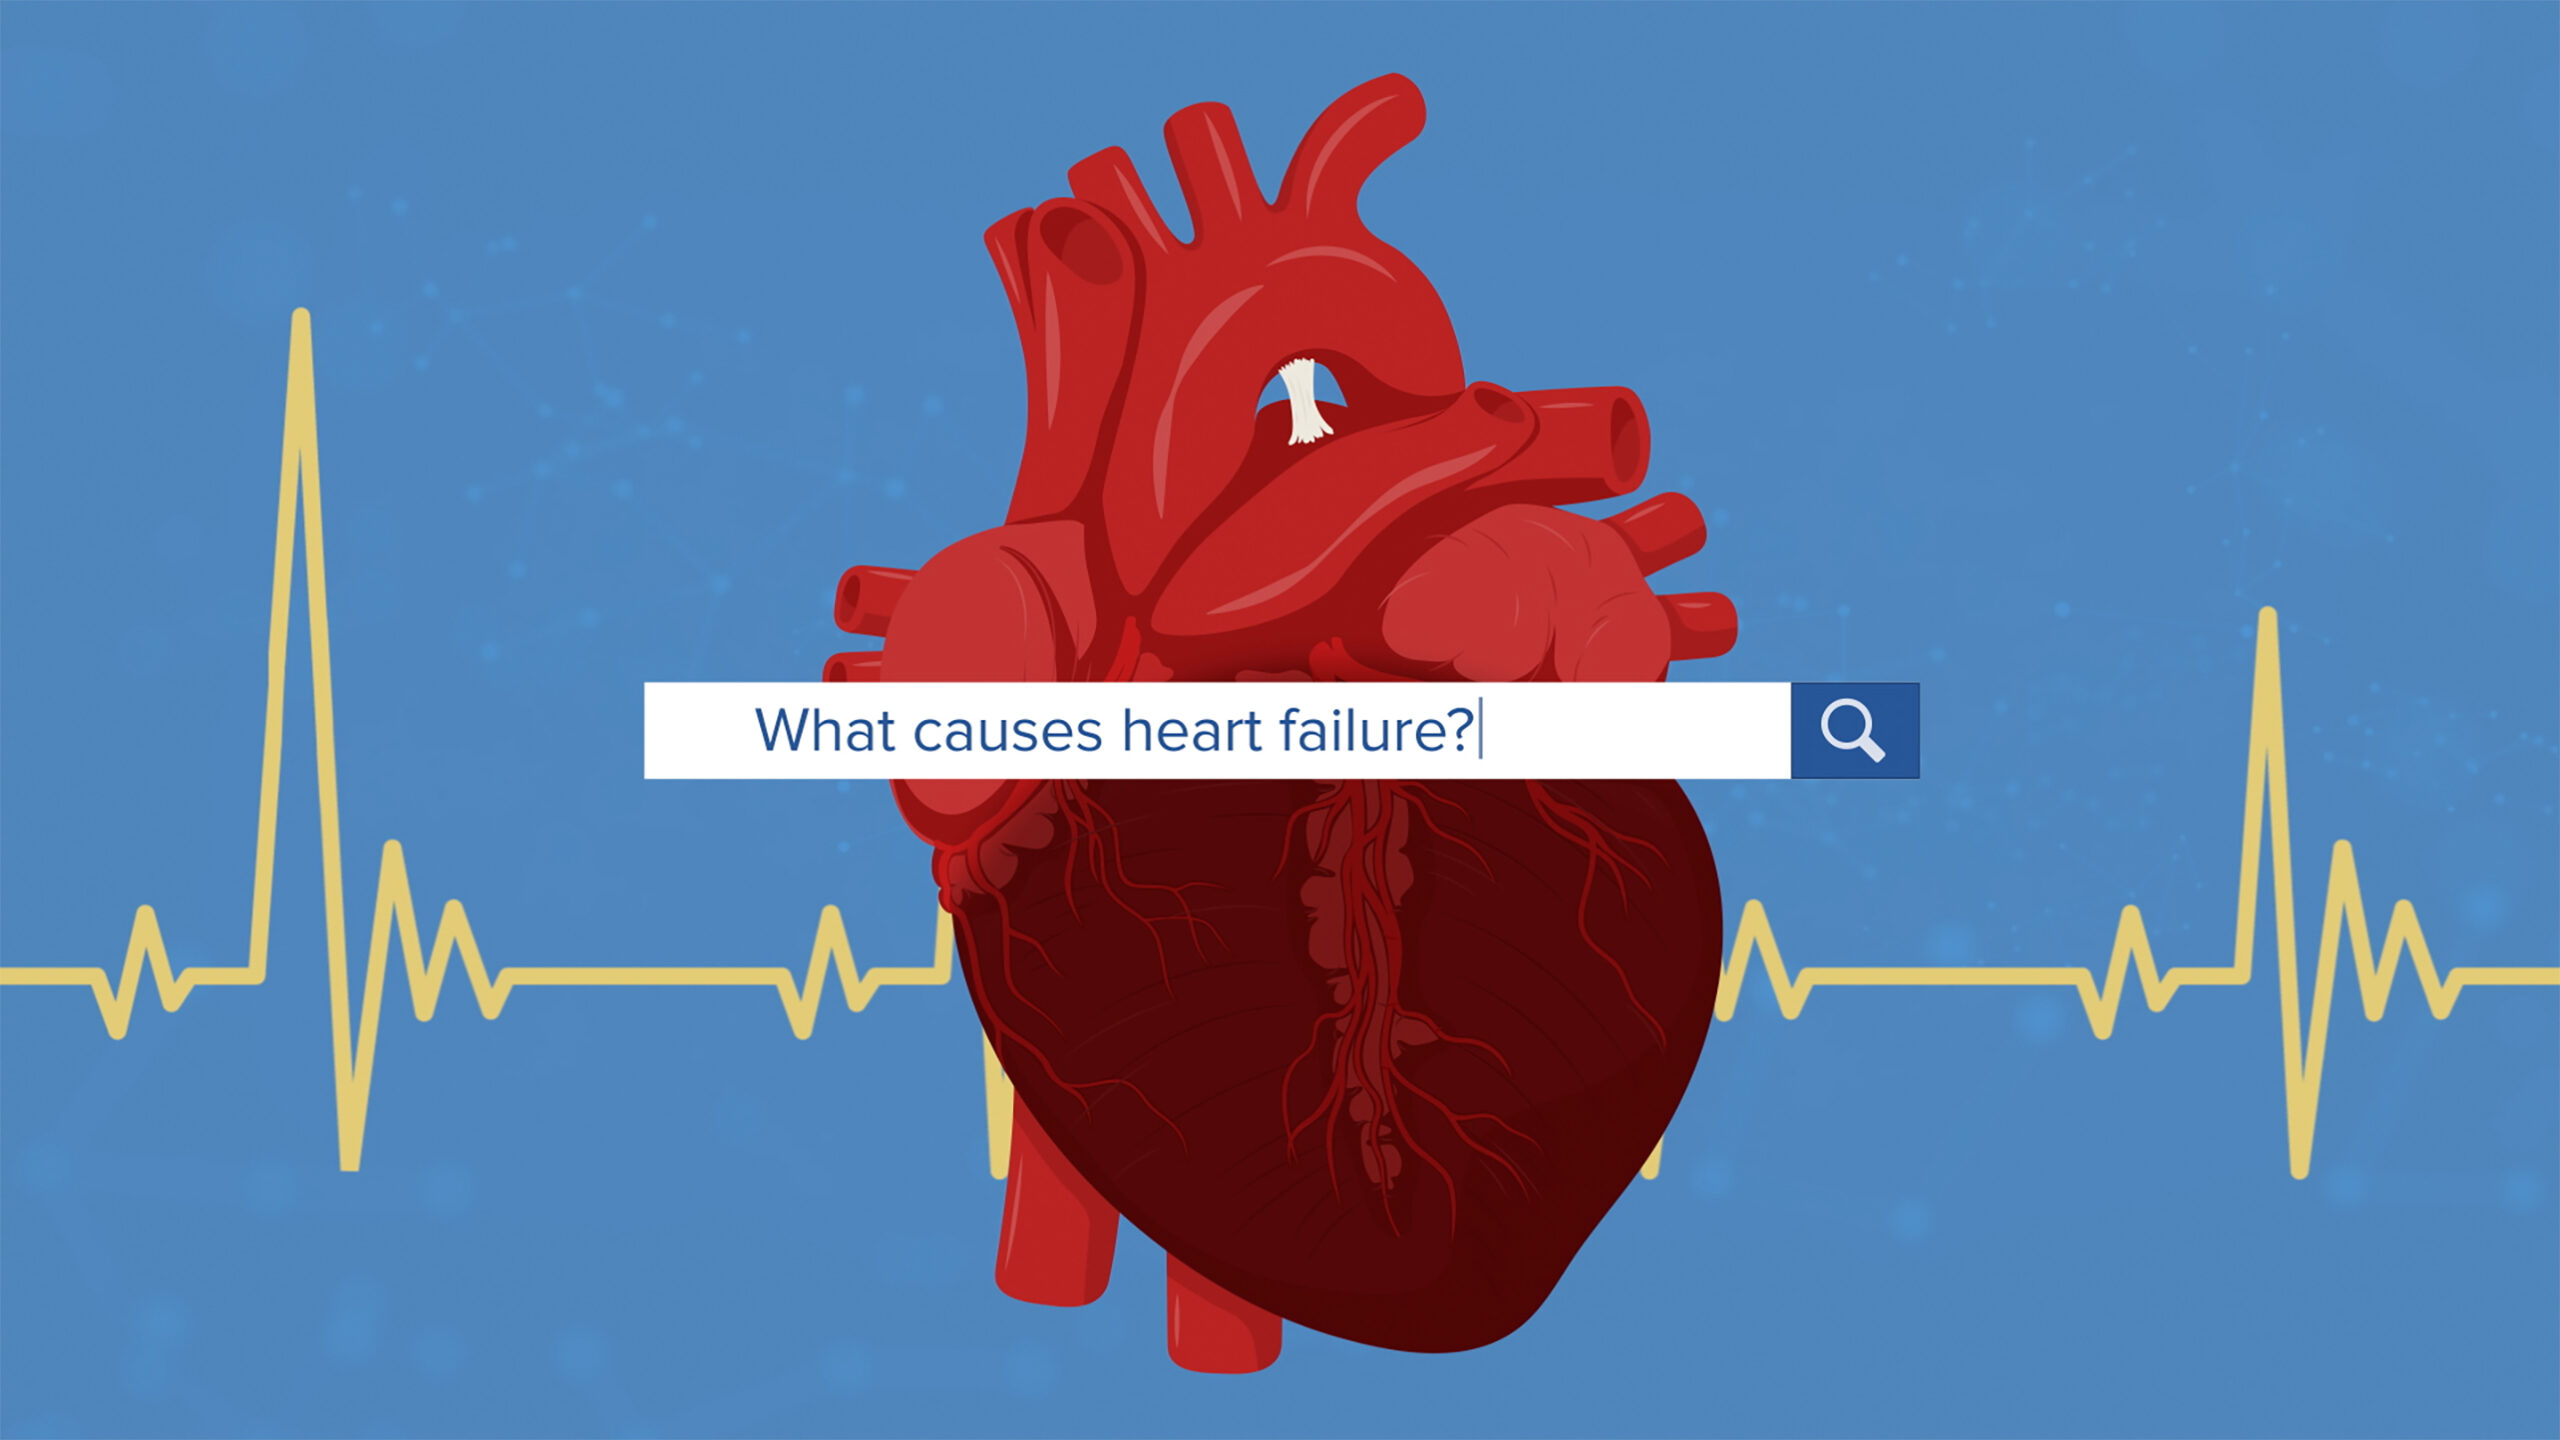 You are currently viewing Cause of increase in heart failure deaths investigated